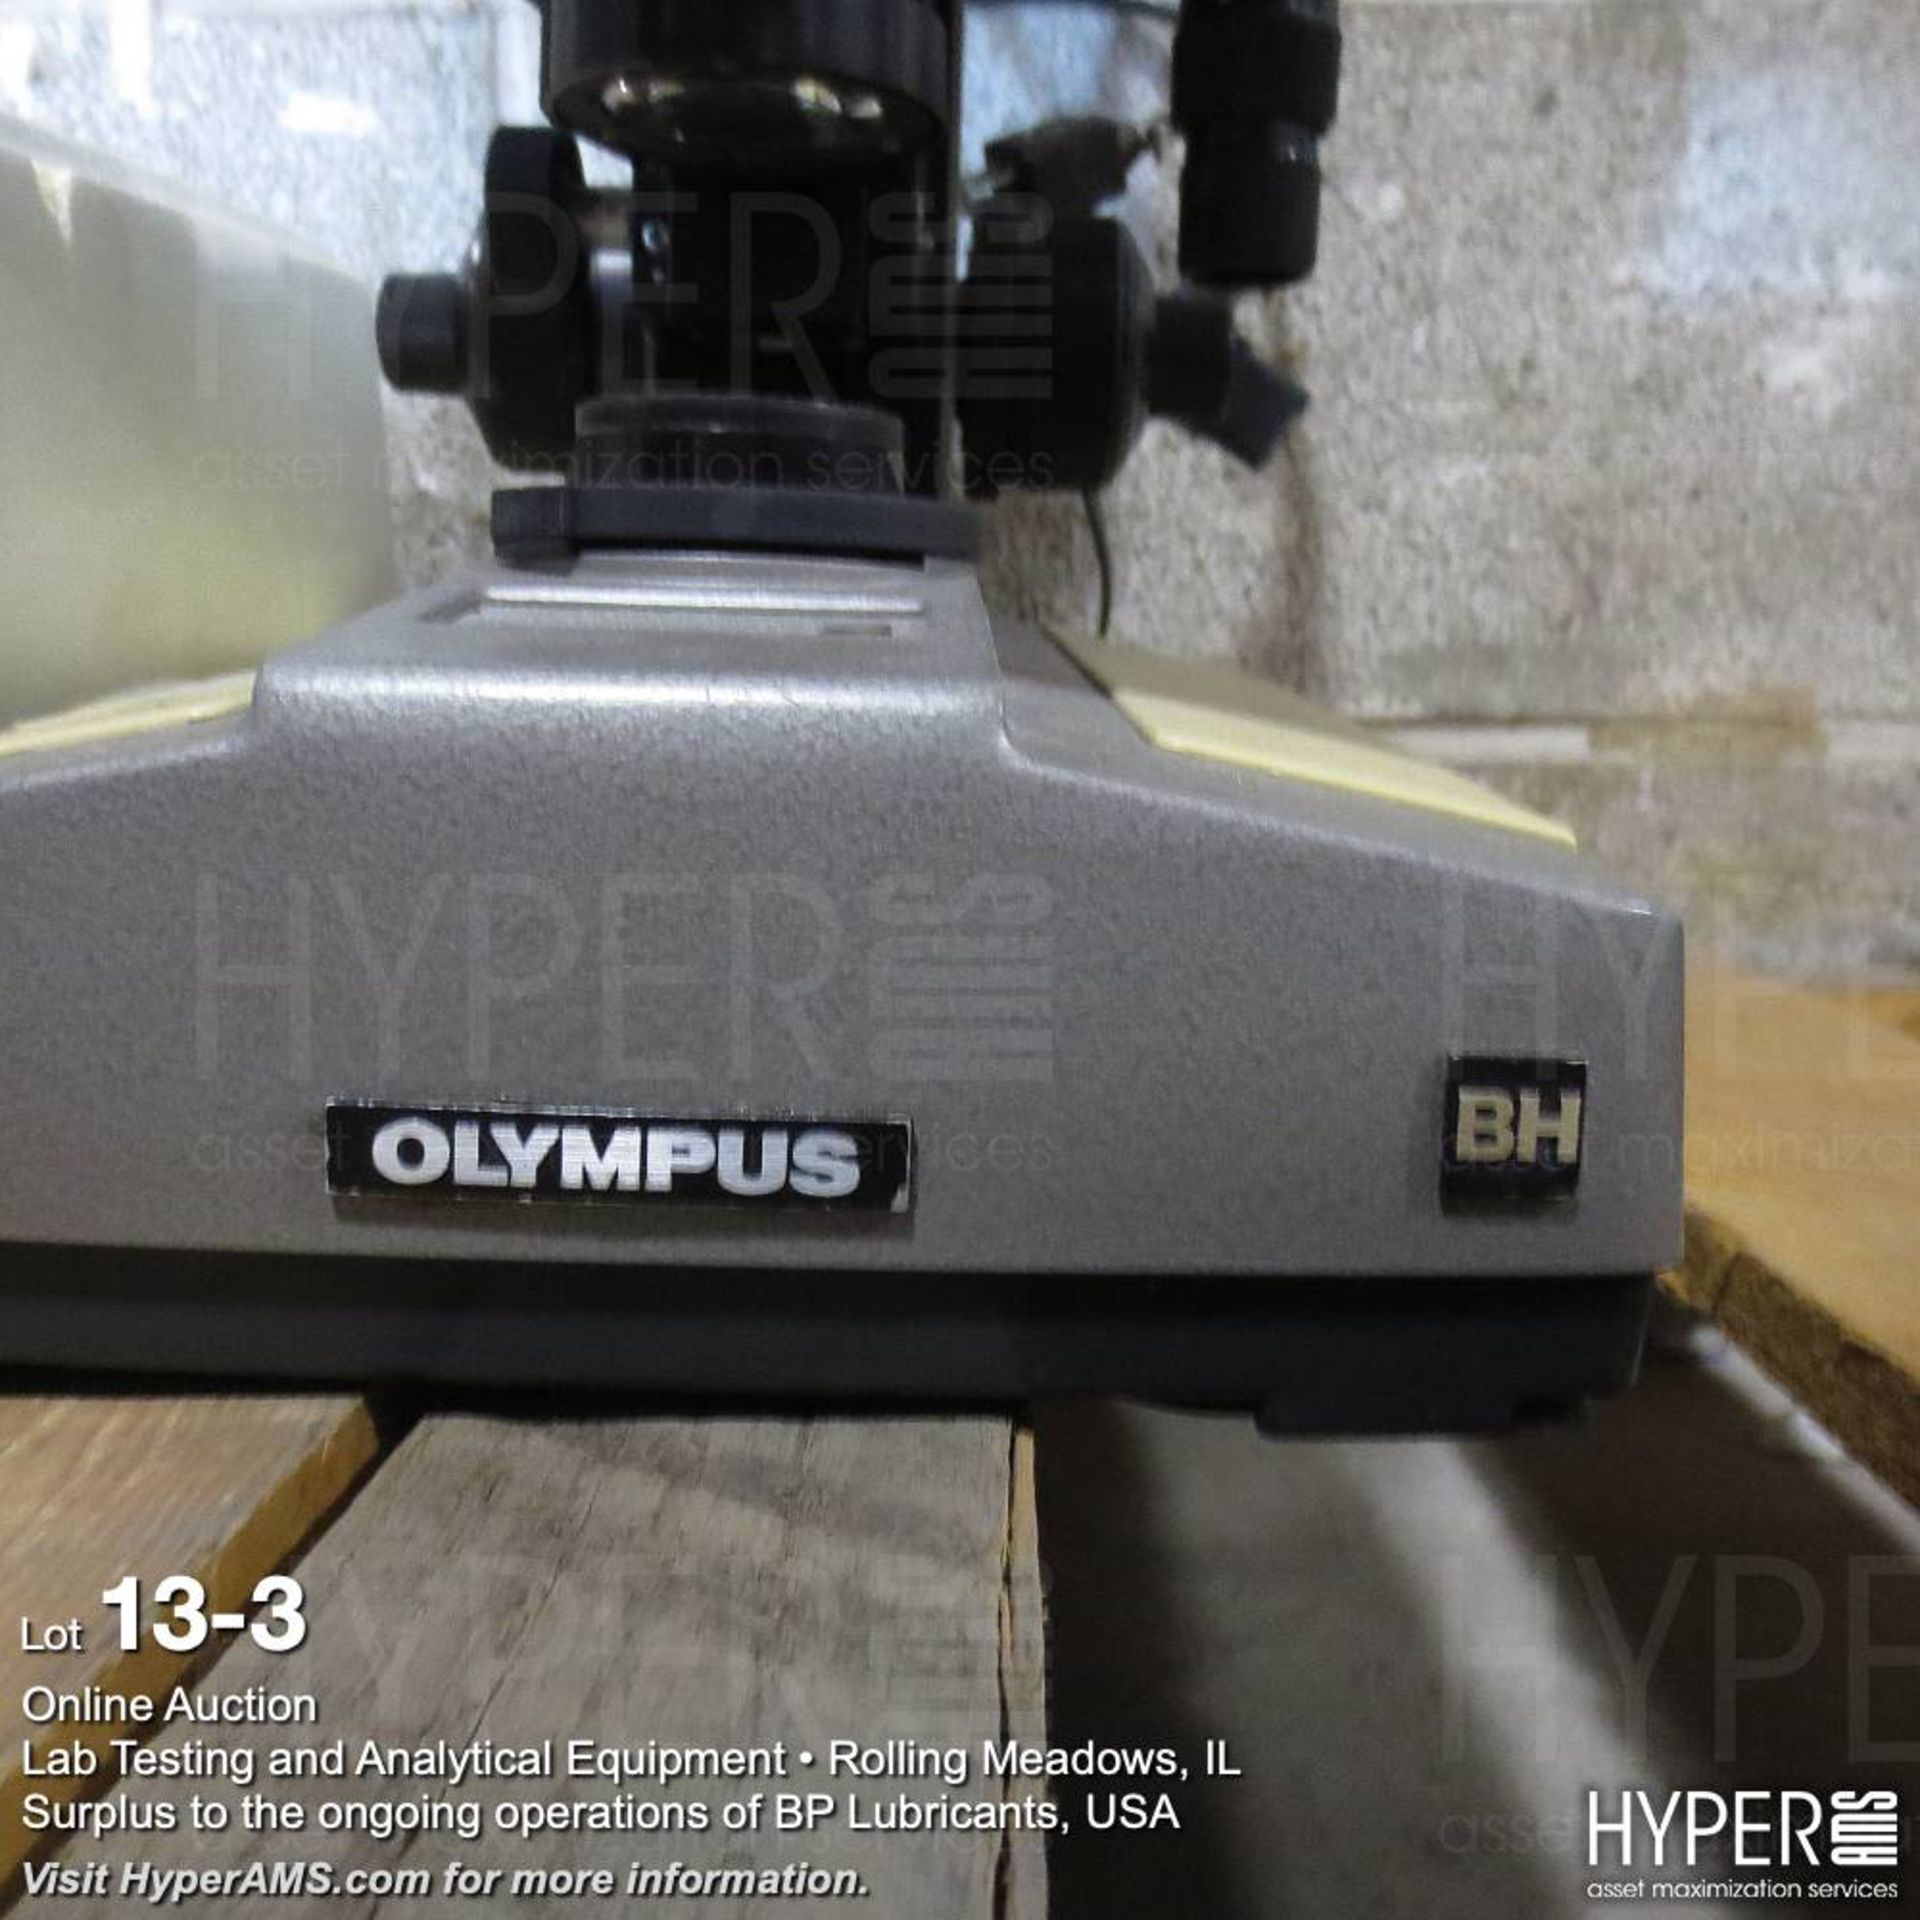 Olympus BH stereo microscope - Image 3 of 4